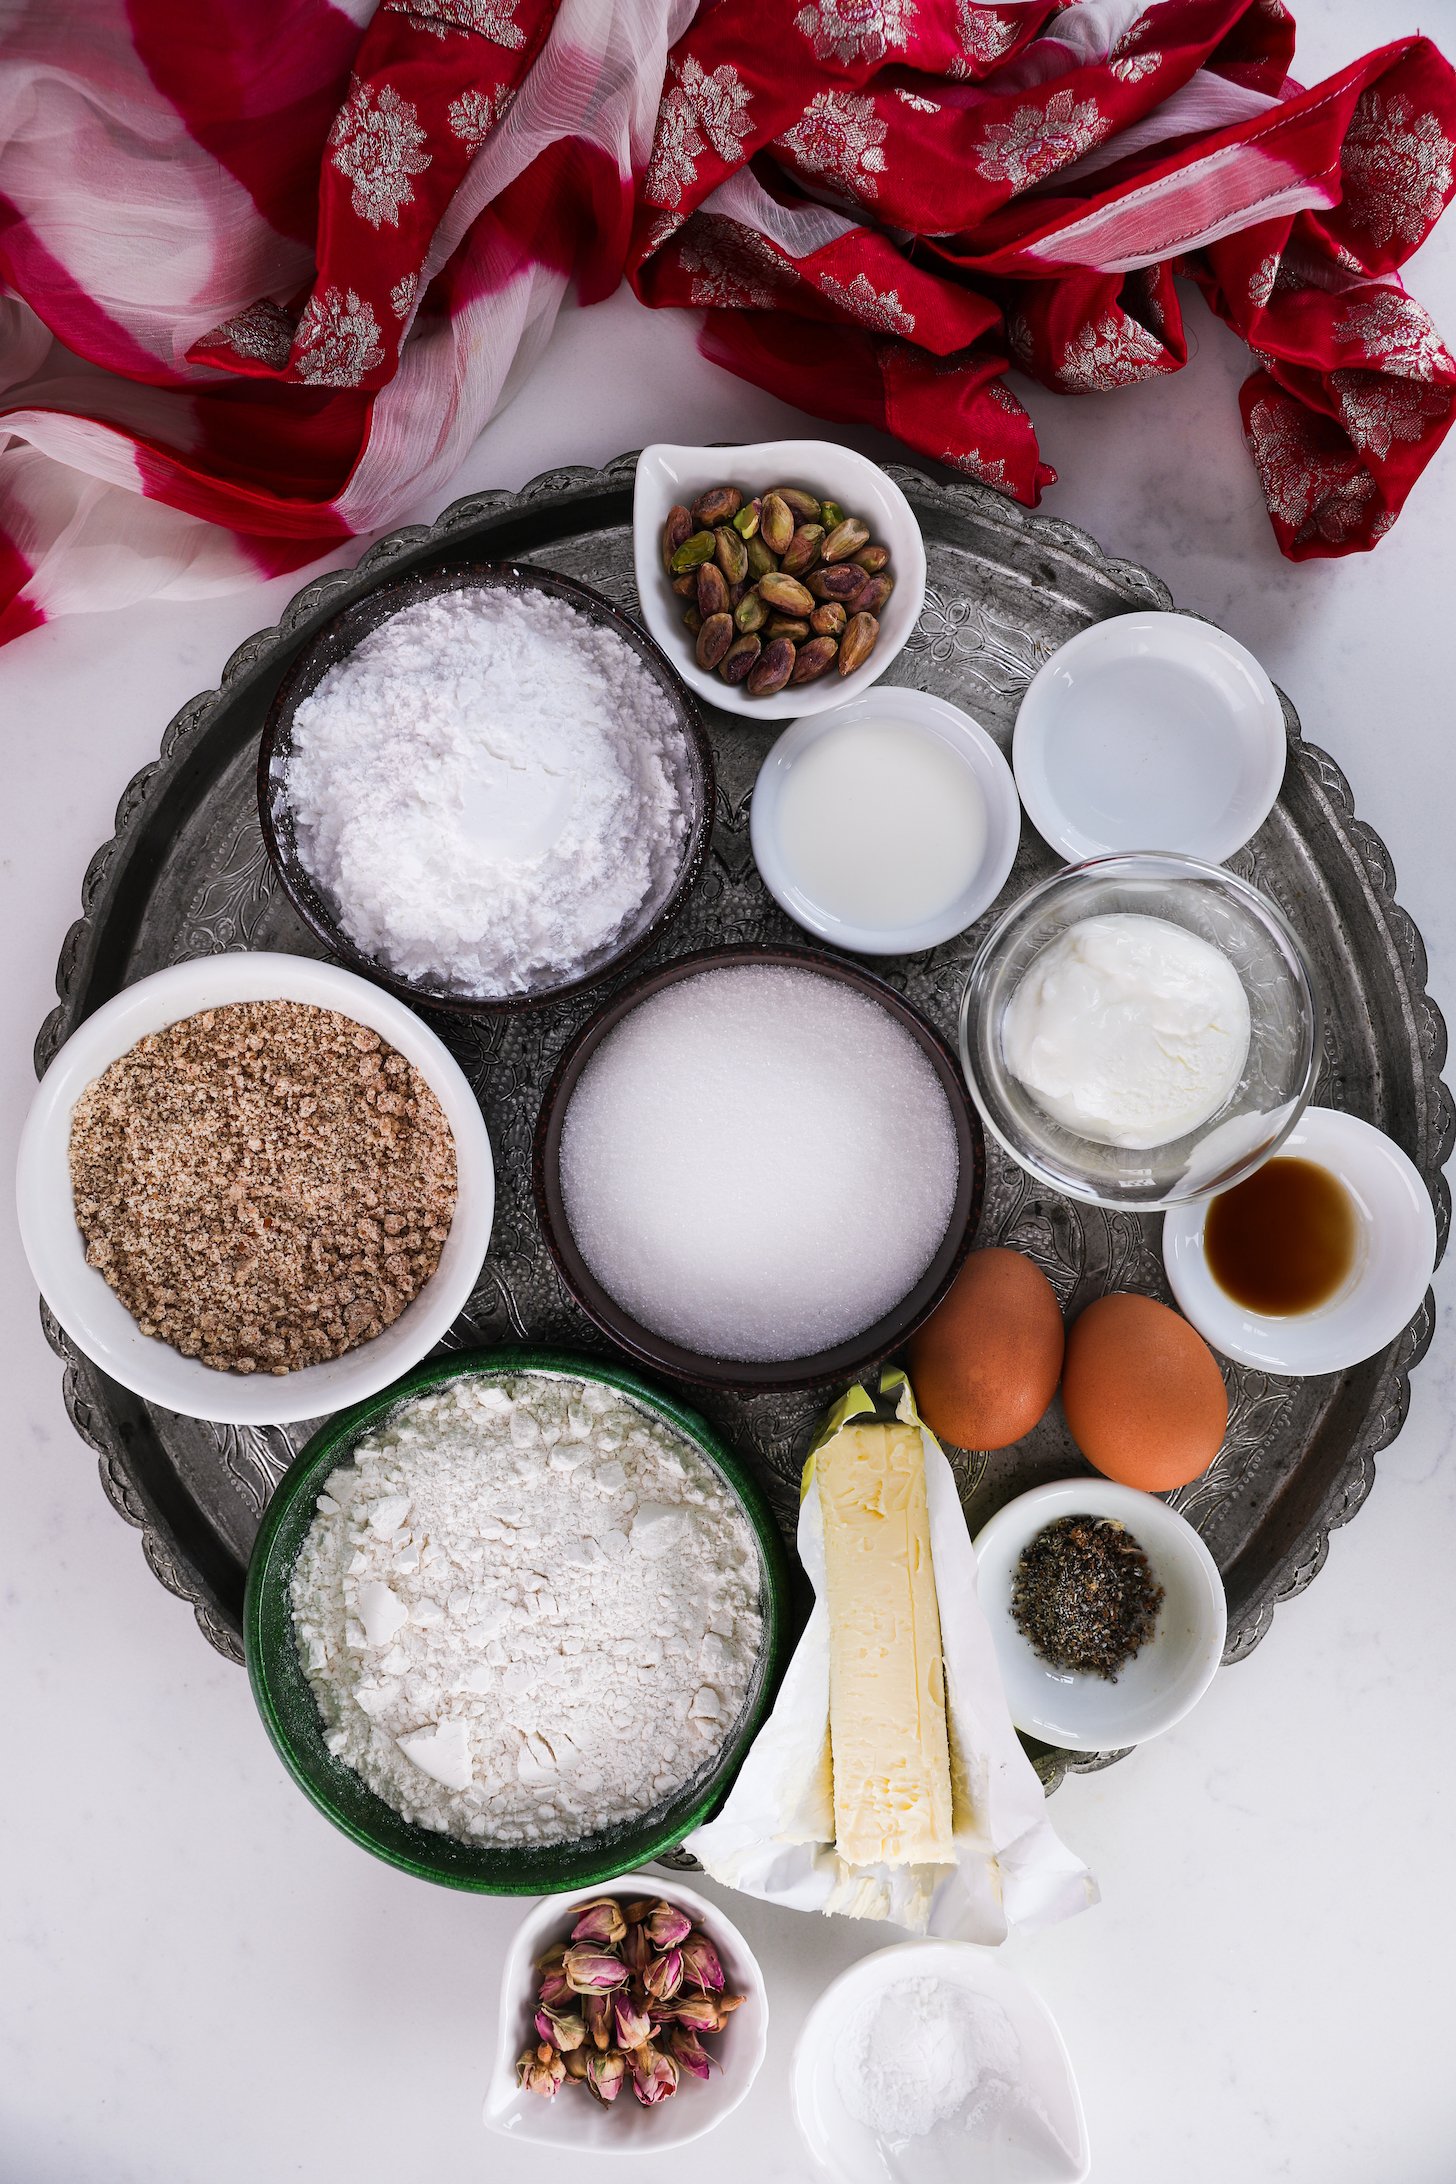 On a round tray, assorted food ingredients—flour, sugars, nuts, eggs, butter, dried roses, and spices—are neatly arranged. A traditional pink scarf rests nearby.